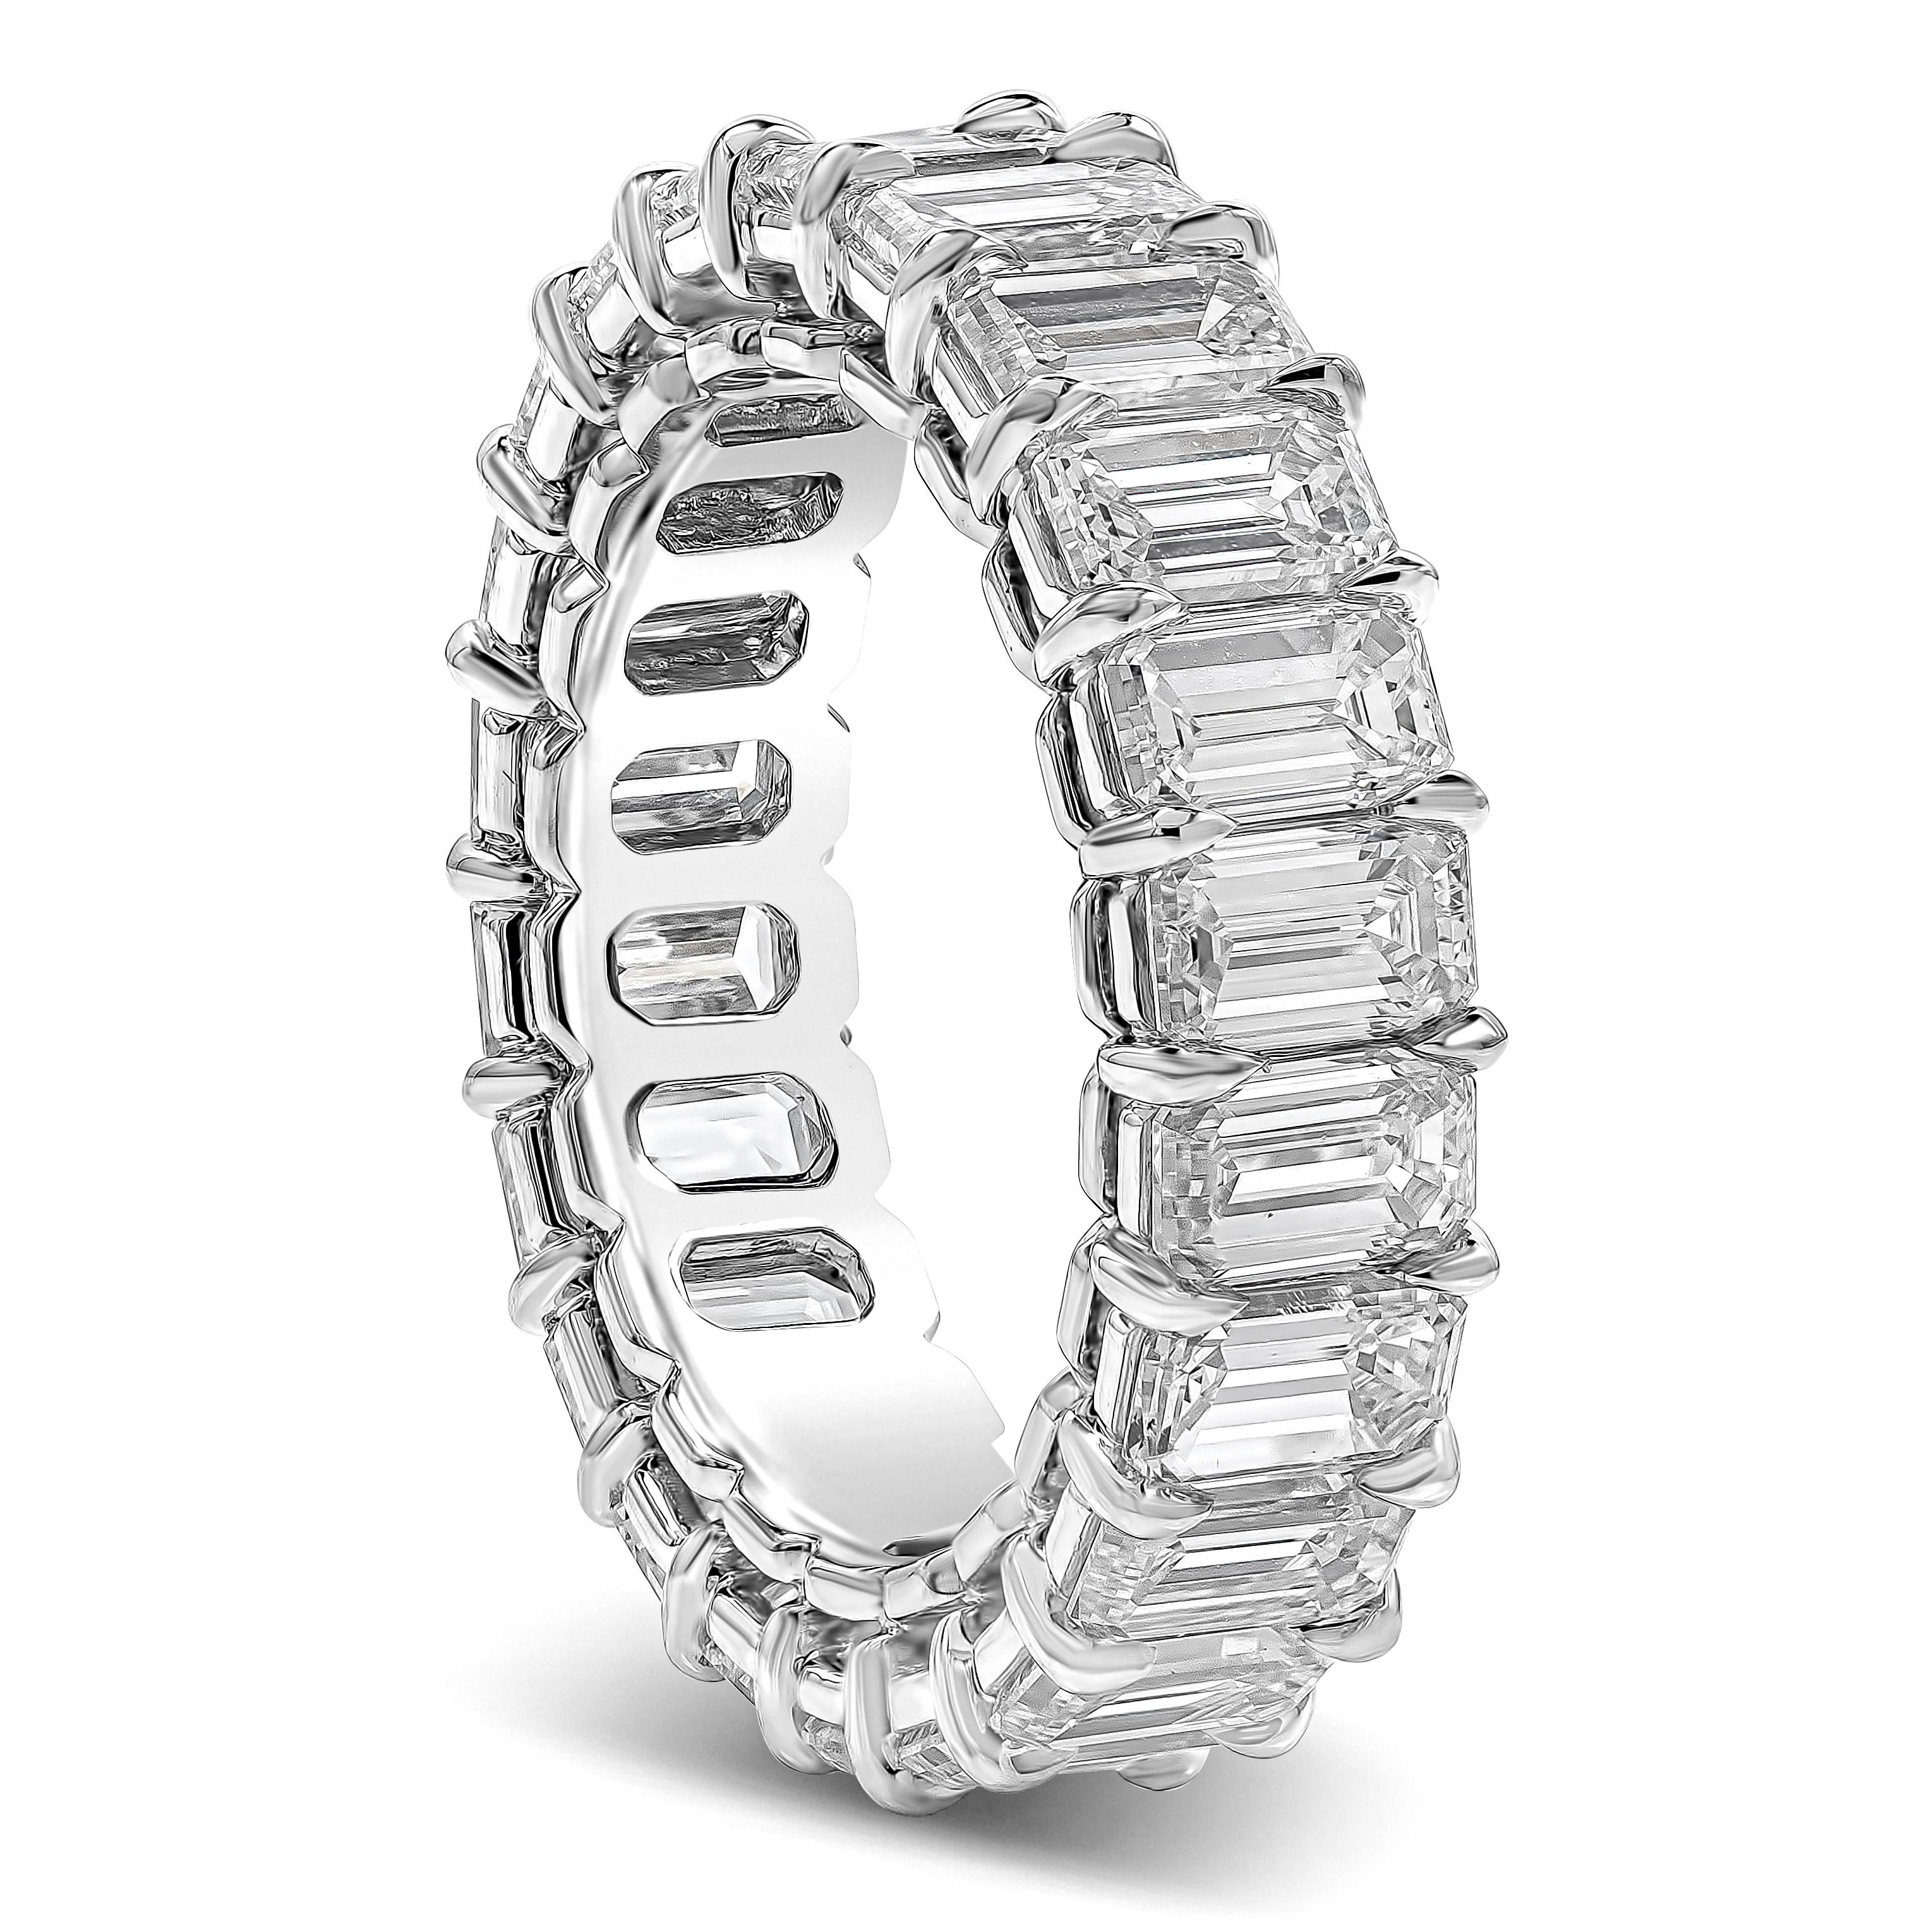 A classic and timeless eternity wedding band ring style showcasing a row of emerald cut diamonds weighing 6.98 carats total, G-H Color and VS-VVS in Clarity. Made with Platinum, Size 6.25 US resizable upon request.

Style available in different